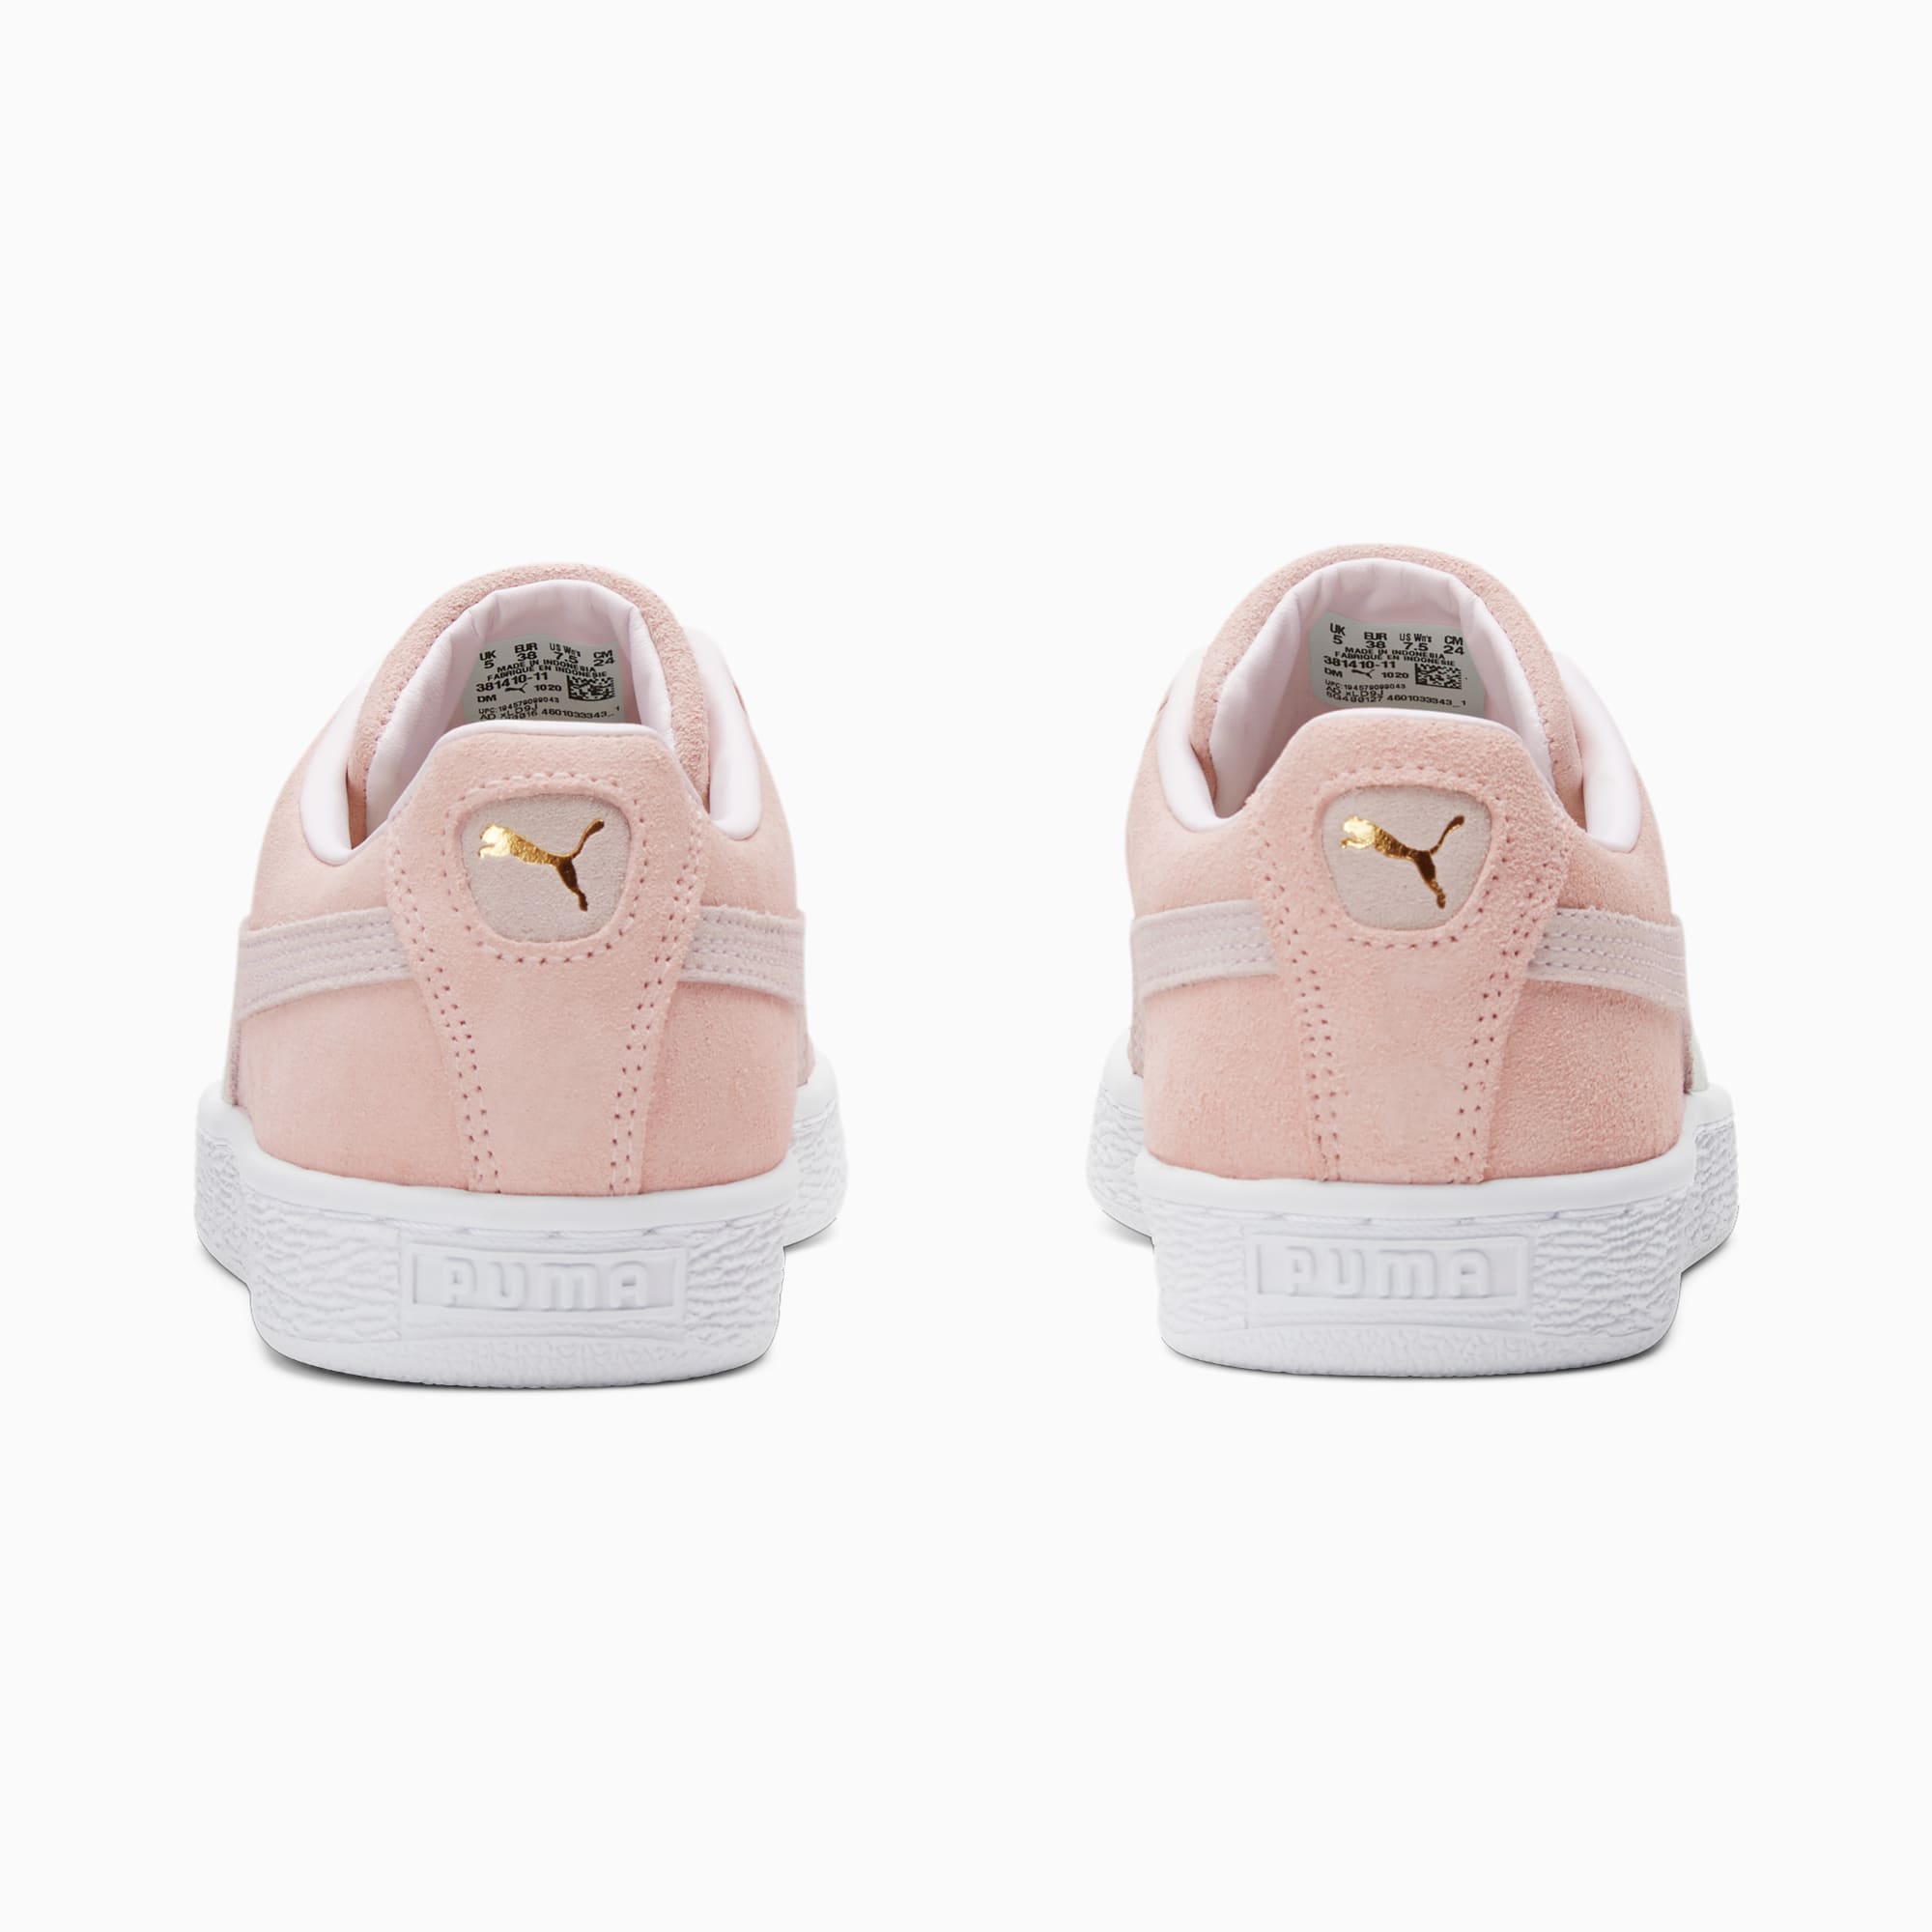 PUMA Suede Classic In Pink For Men Lyst | atelier-yuwa.ciao.jp